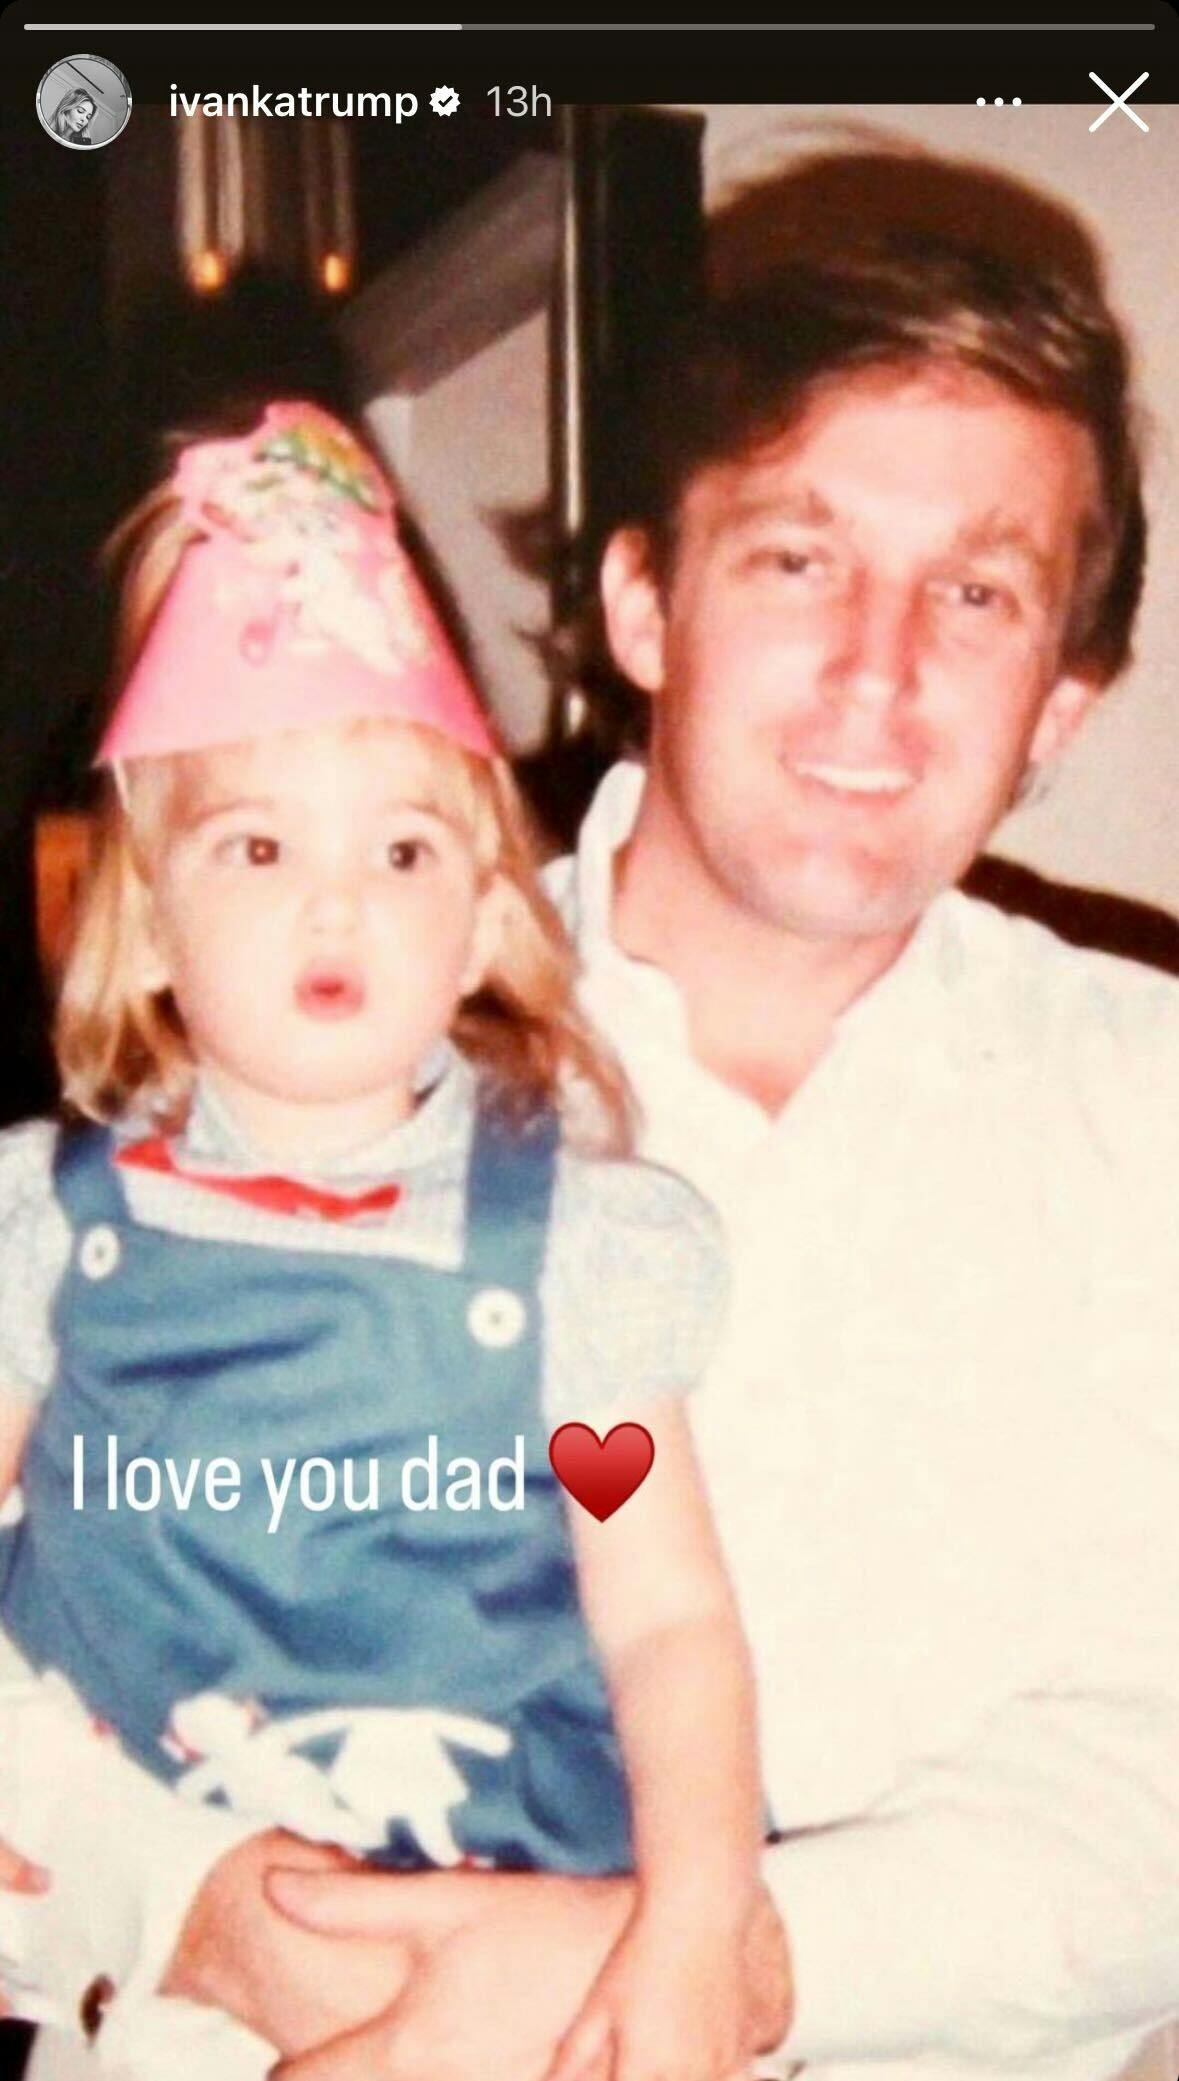 Instagram Screenshot: Donald Trump holding a toddler Ivanka Trump who seems to be wearing a birthday hat. The caption says "I love you dad" with a heart emoji.